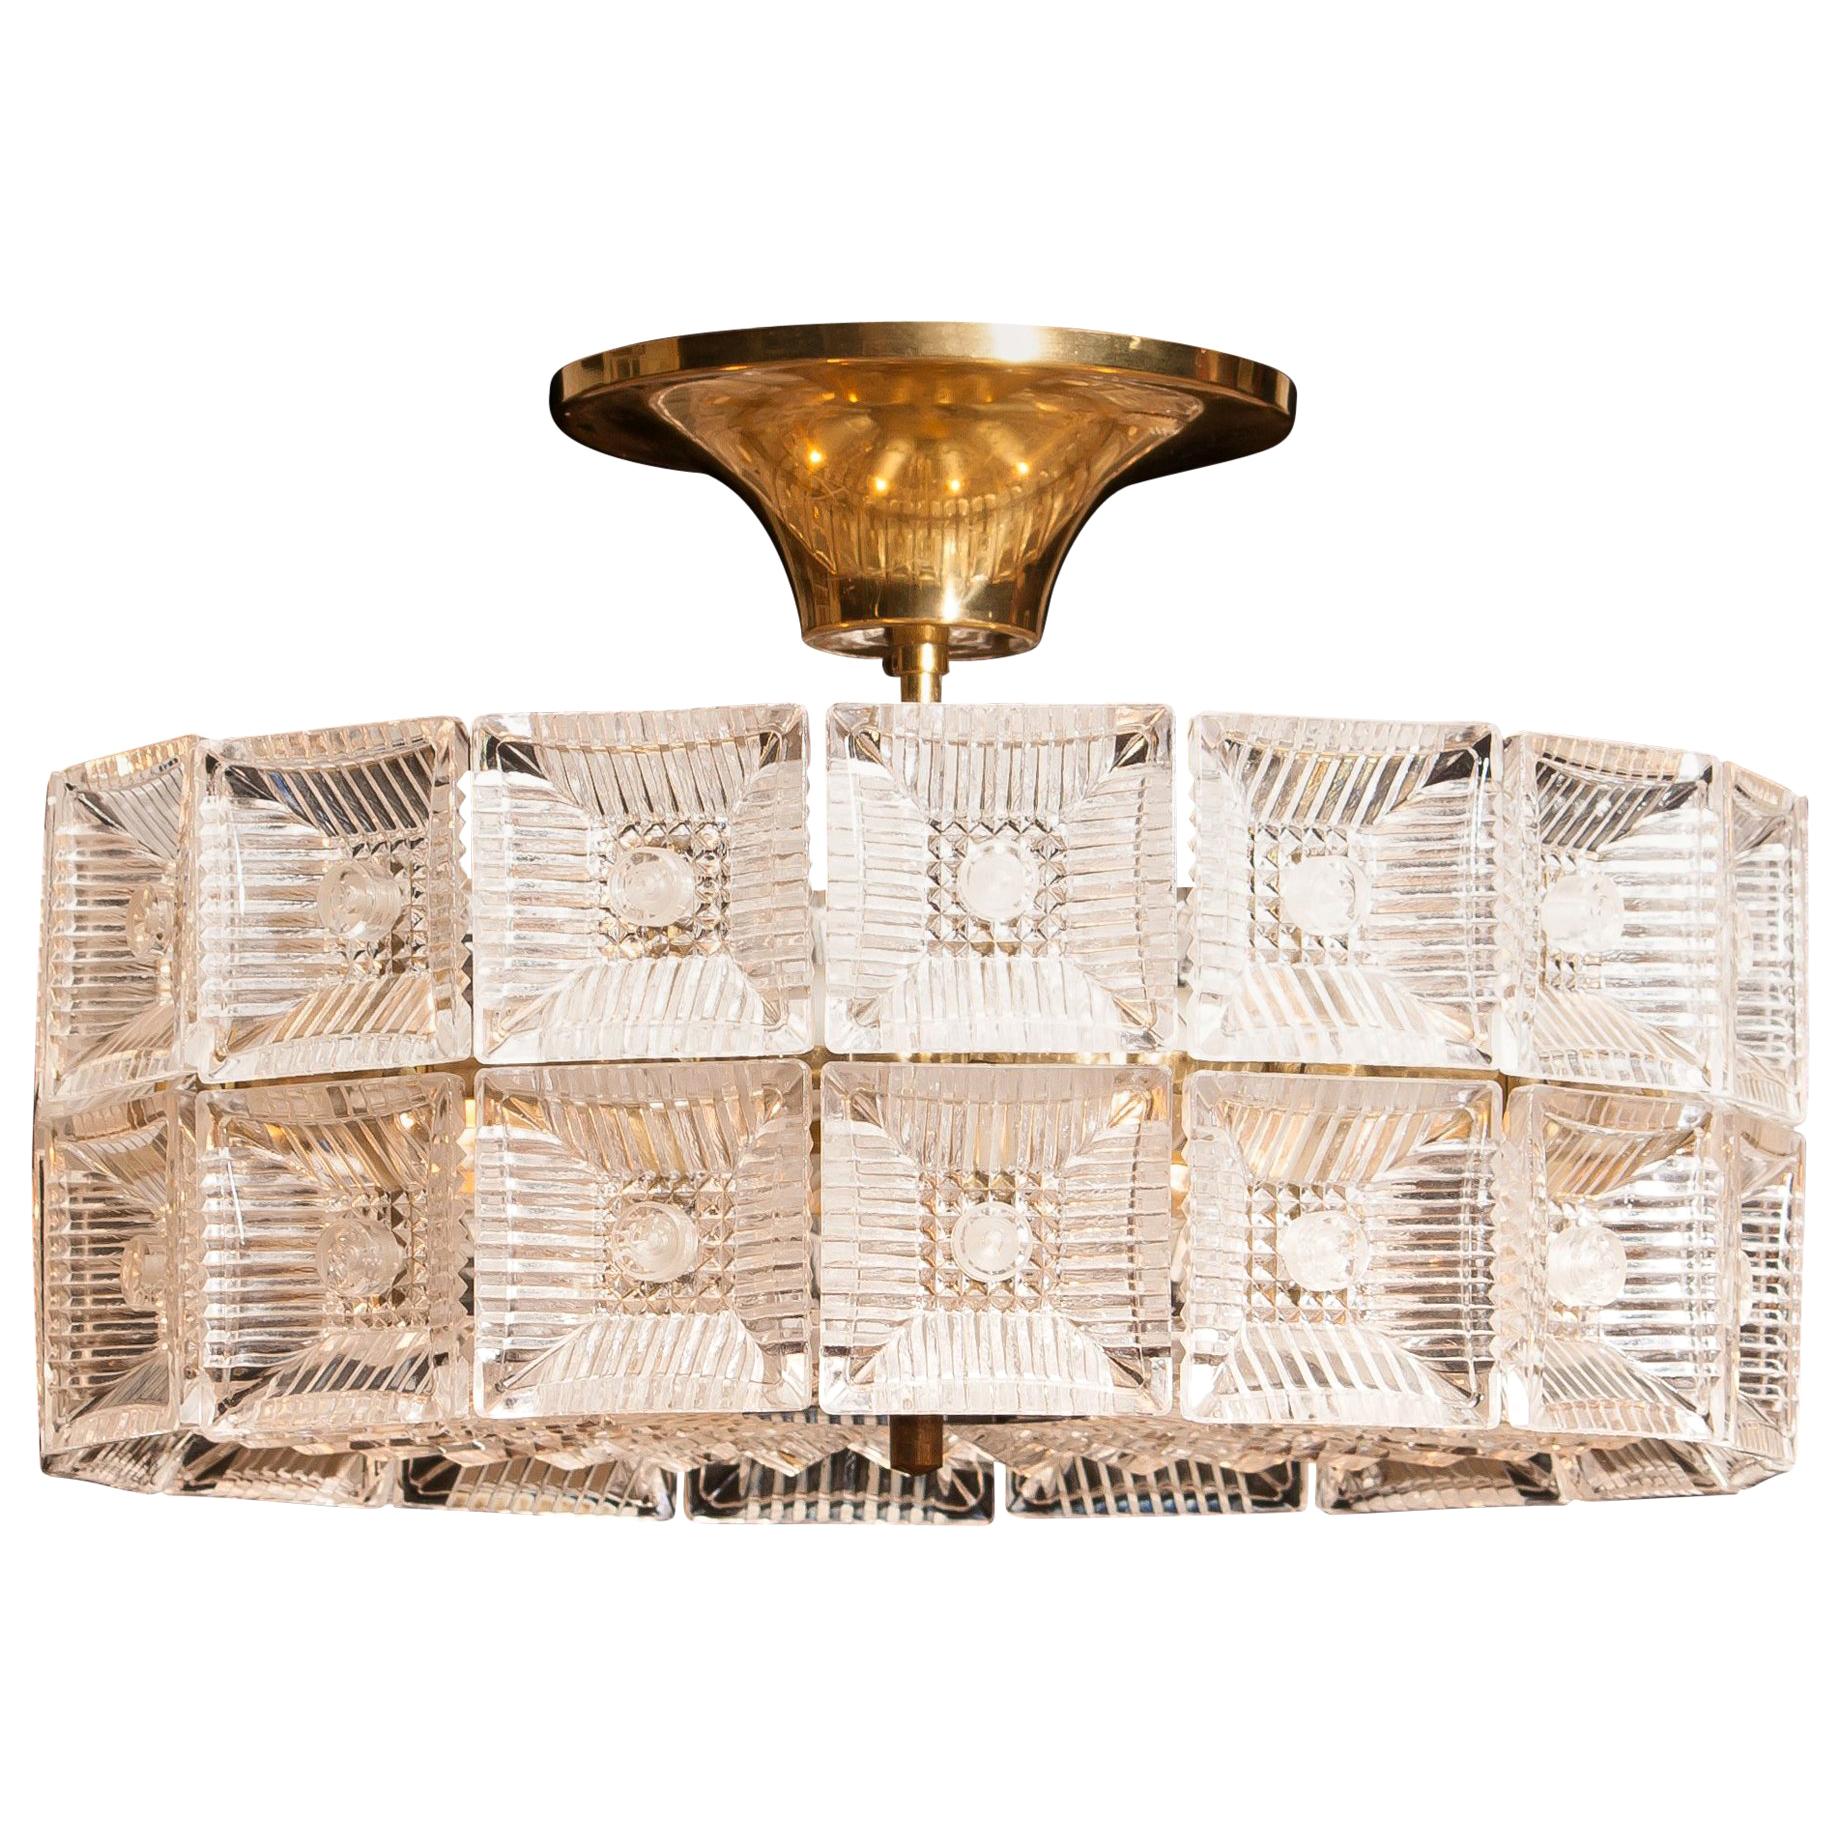 Magnificent ceiling light designed by Carl Fagerlund for Orrefors Sweden.
This lamp is made of beautiful brass and glass elements.
It is in wonderful condition.
Period, 1960s.
Dimensions: H 25 cm, ø 42 cm.
 